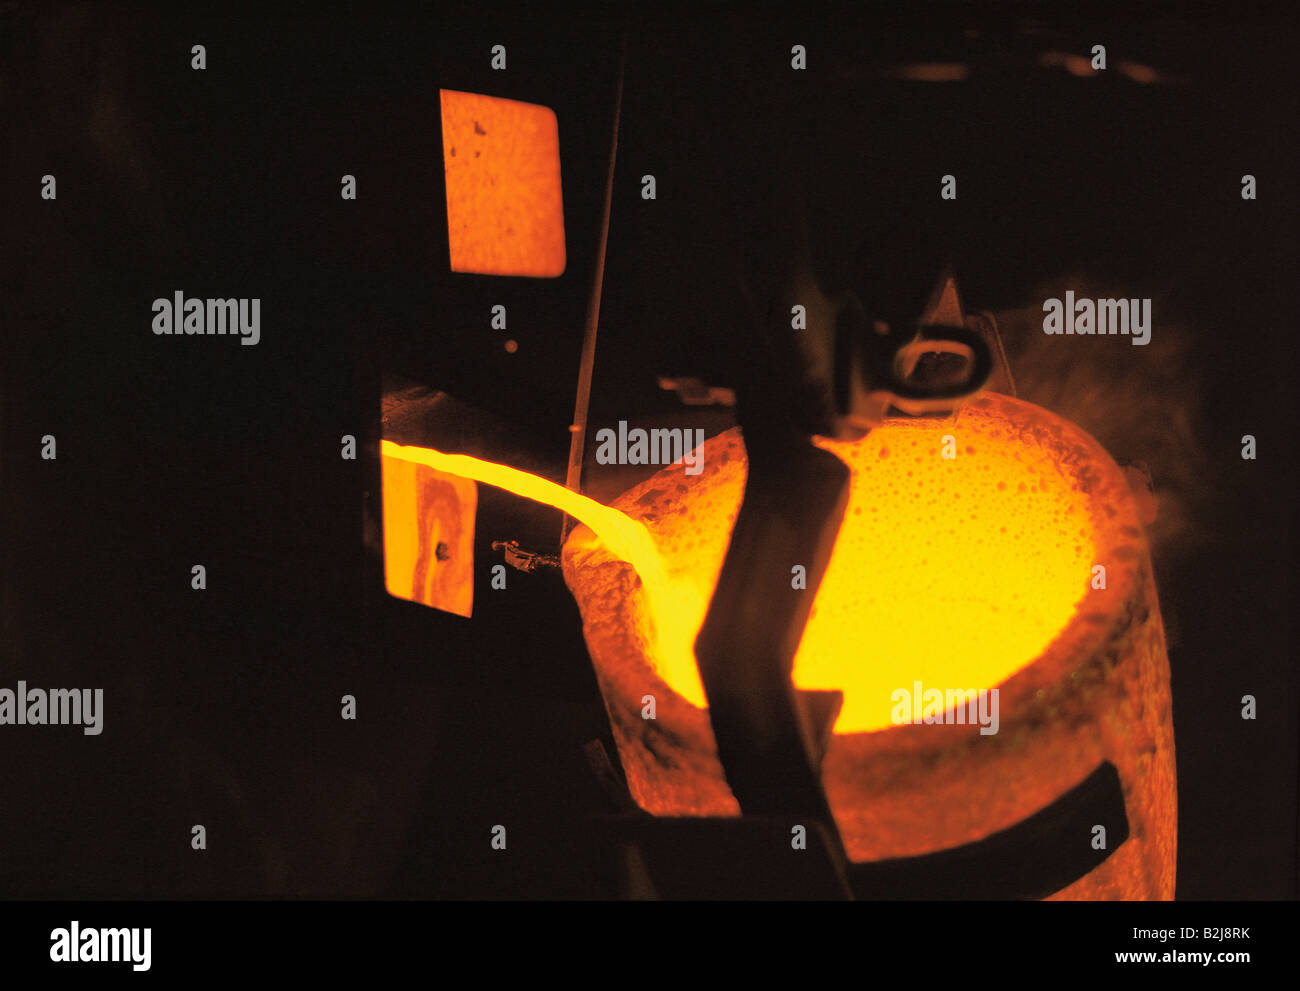 Overhead view of a furnace in detail. Molten gold metal pouring. Stock Photo